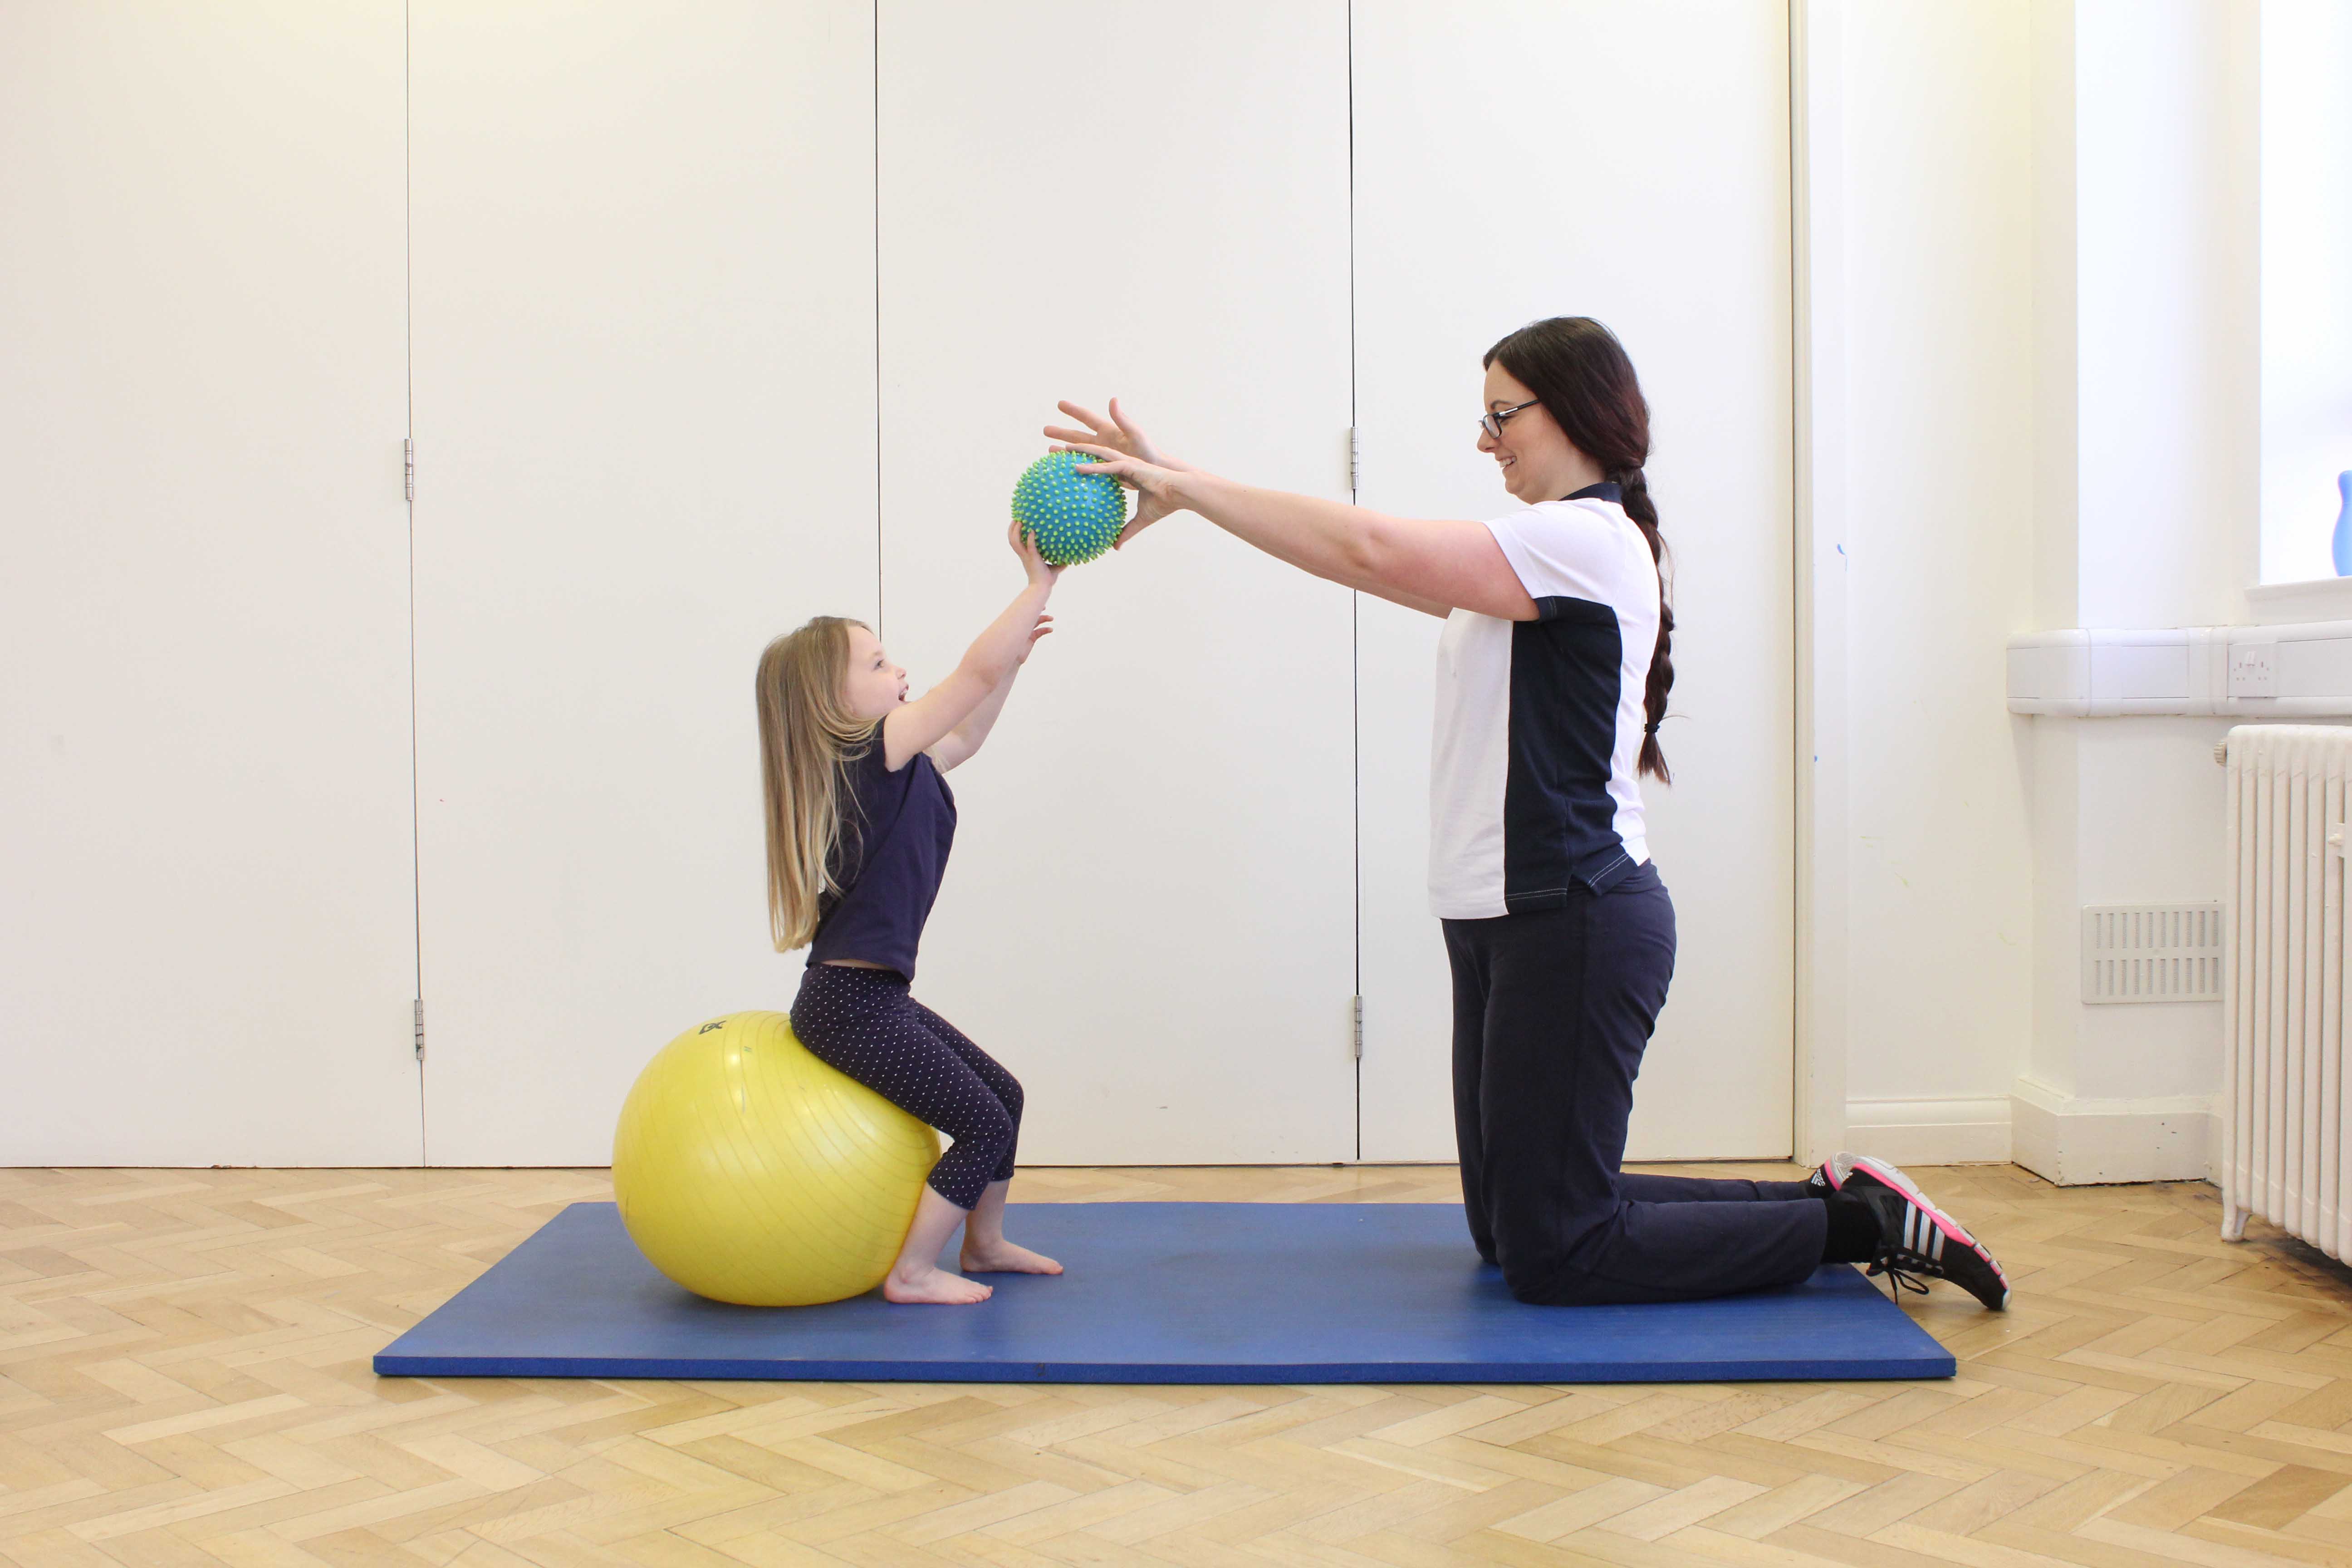 Core stability, balance and co-ordination exercises conducted by a neurological physiotherapist